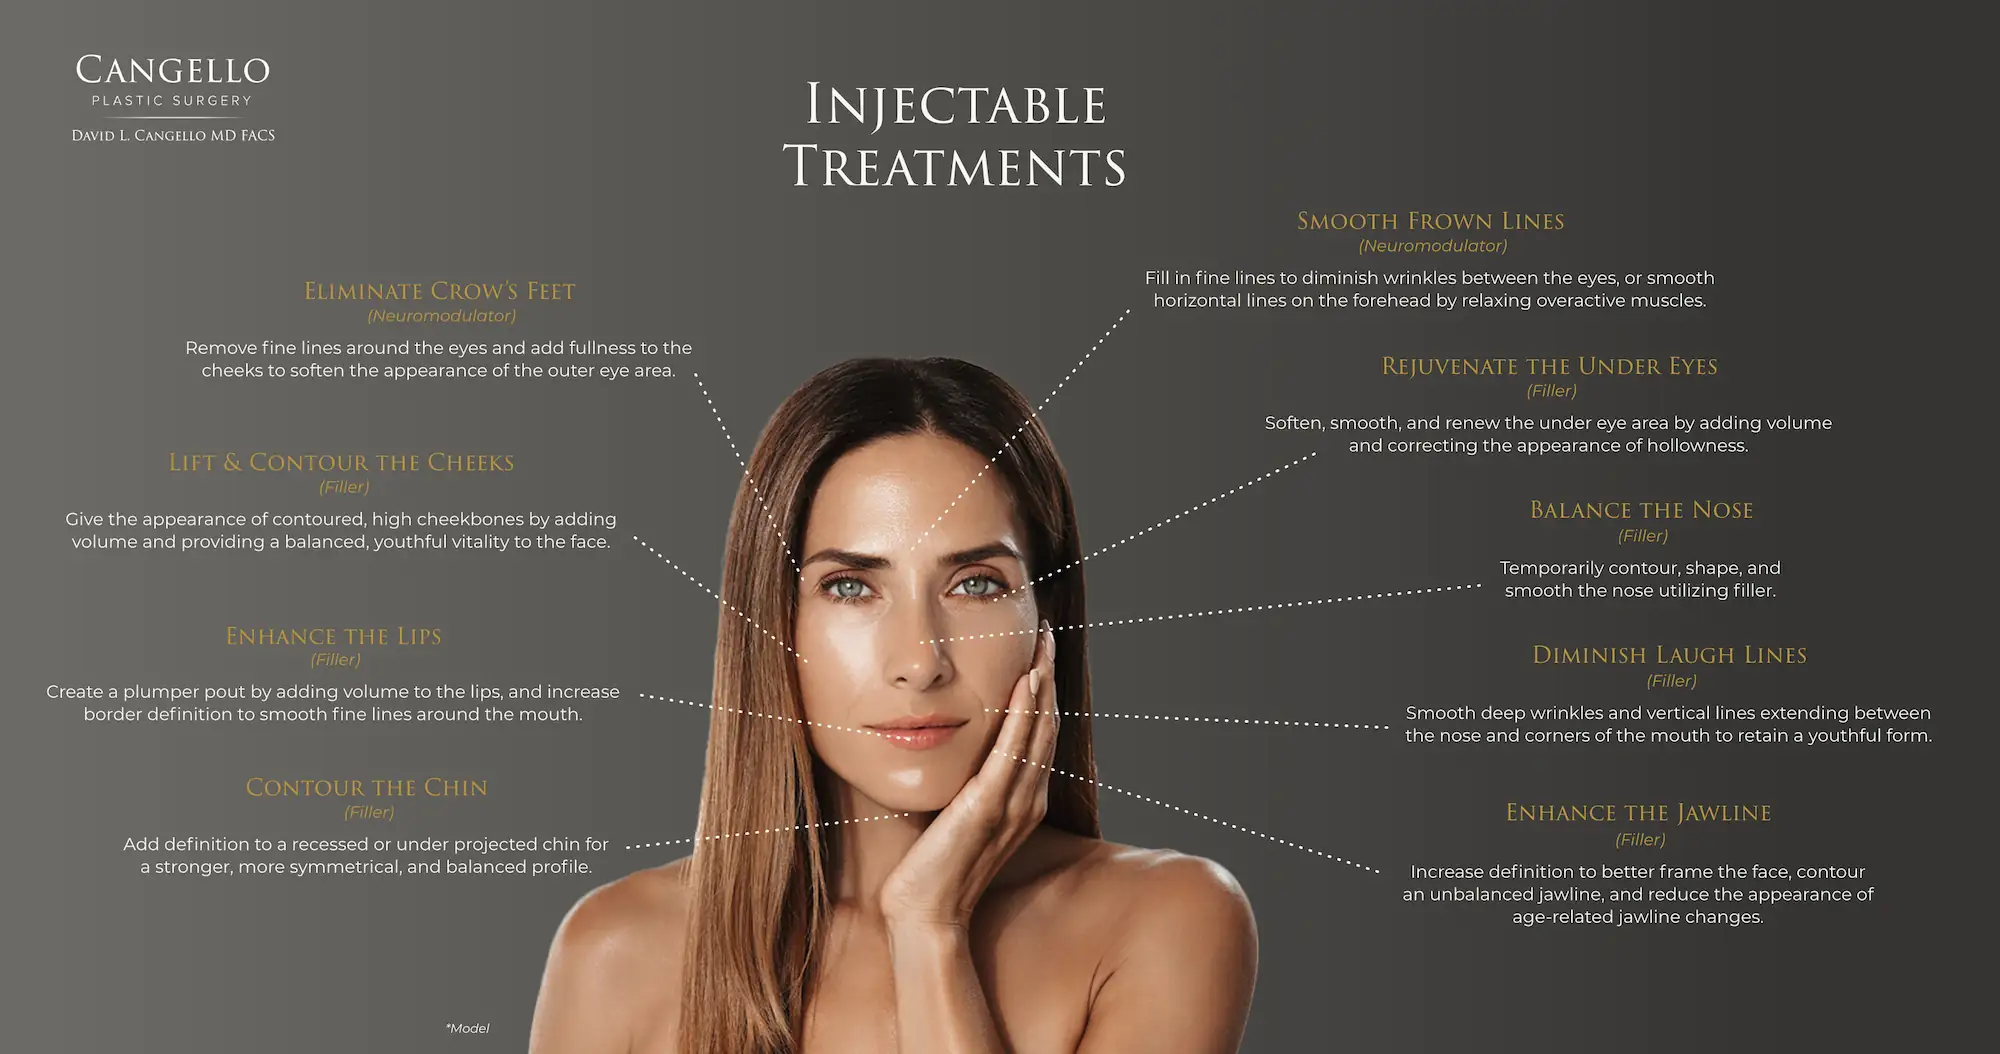 Graphic depicting different treatments for different areas of the face